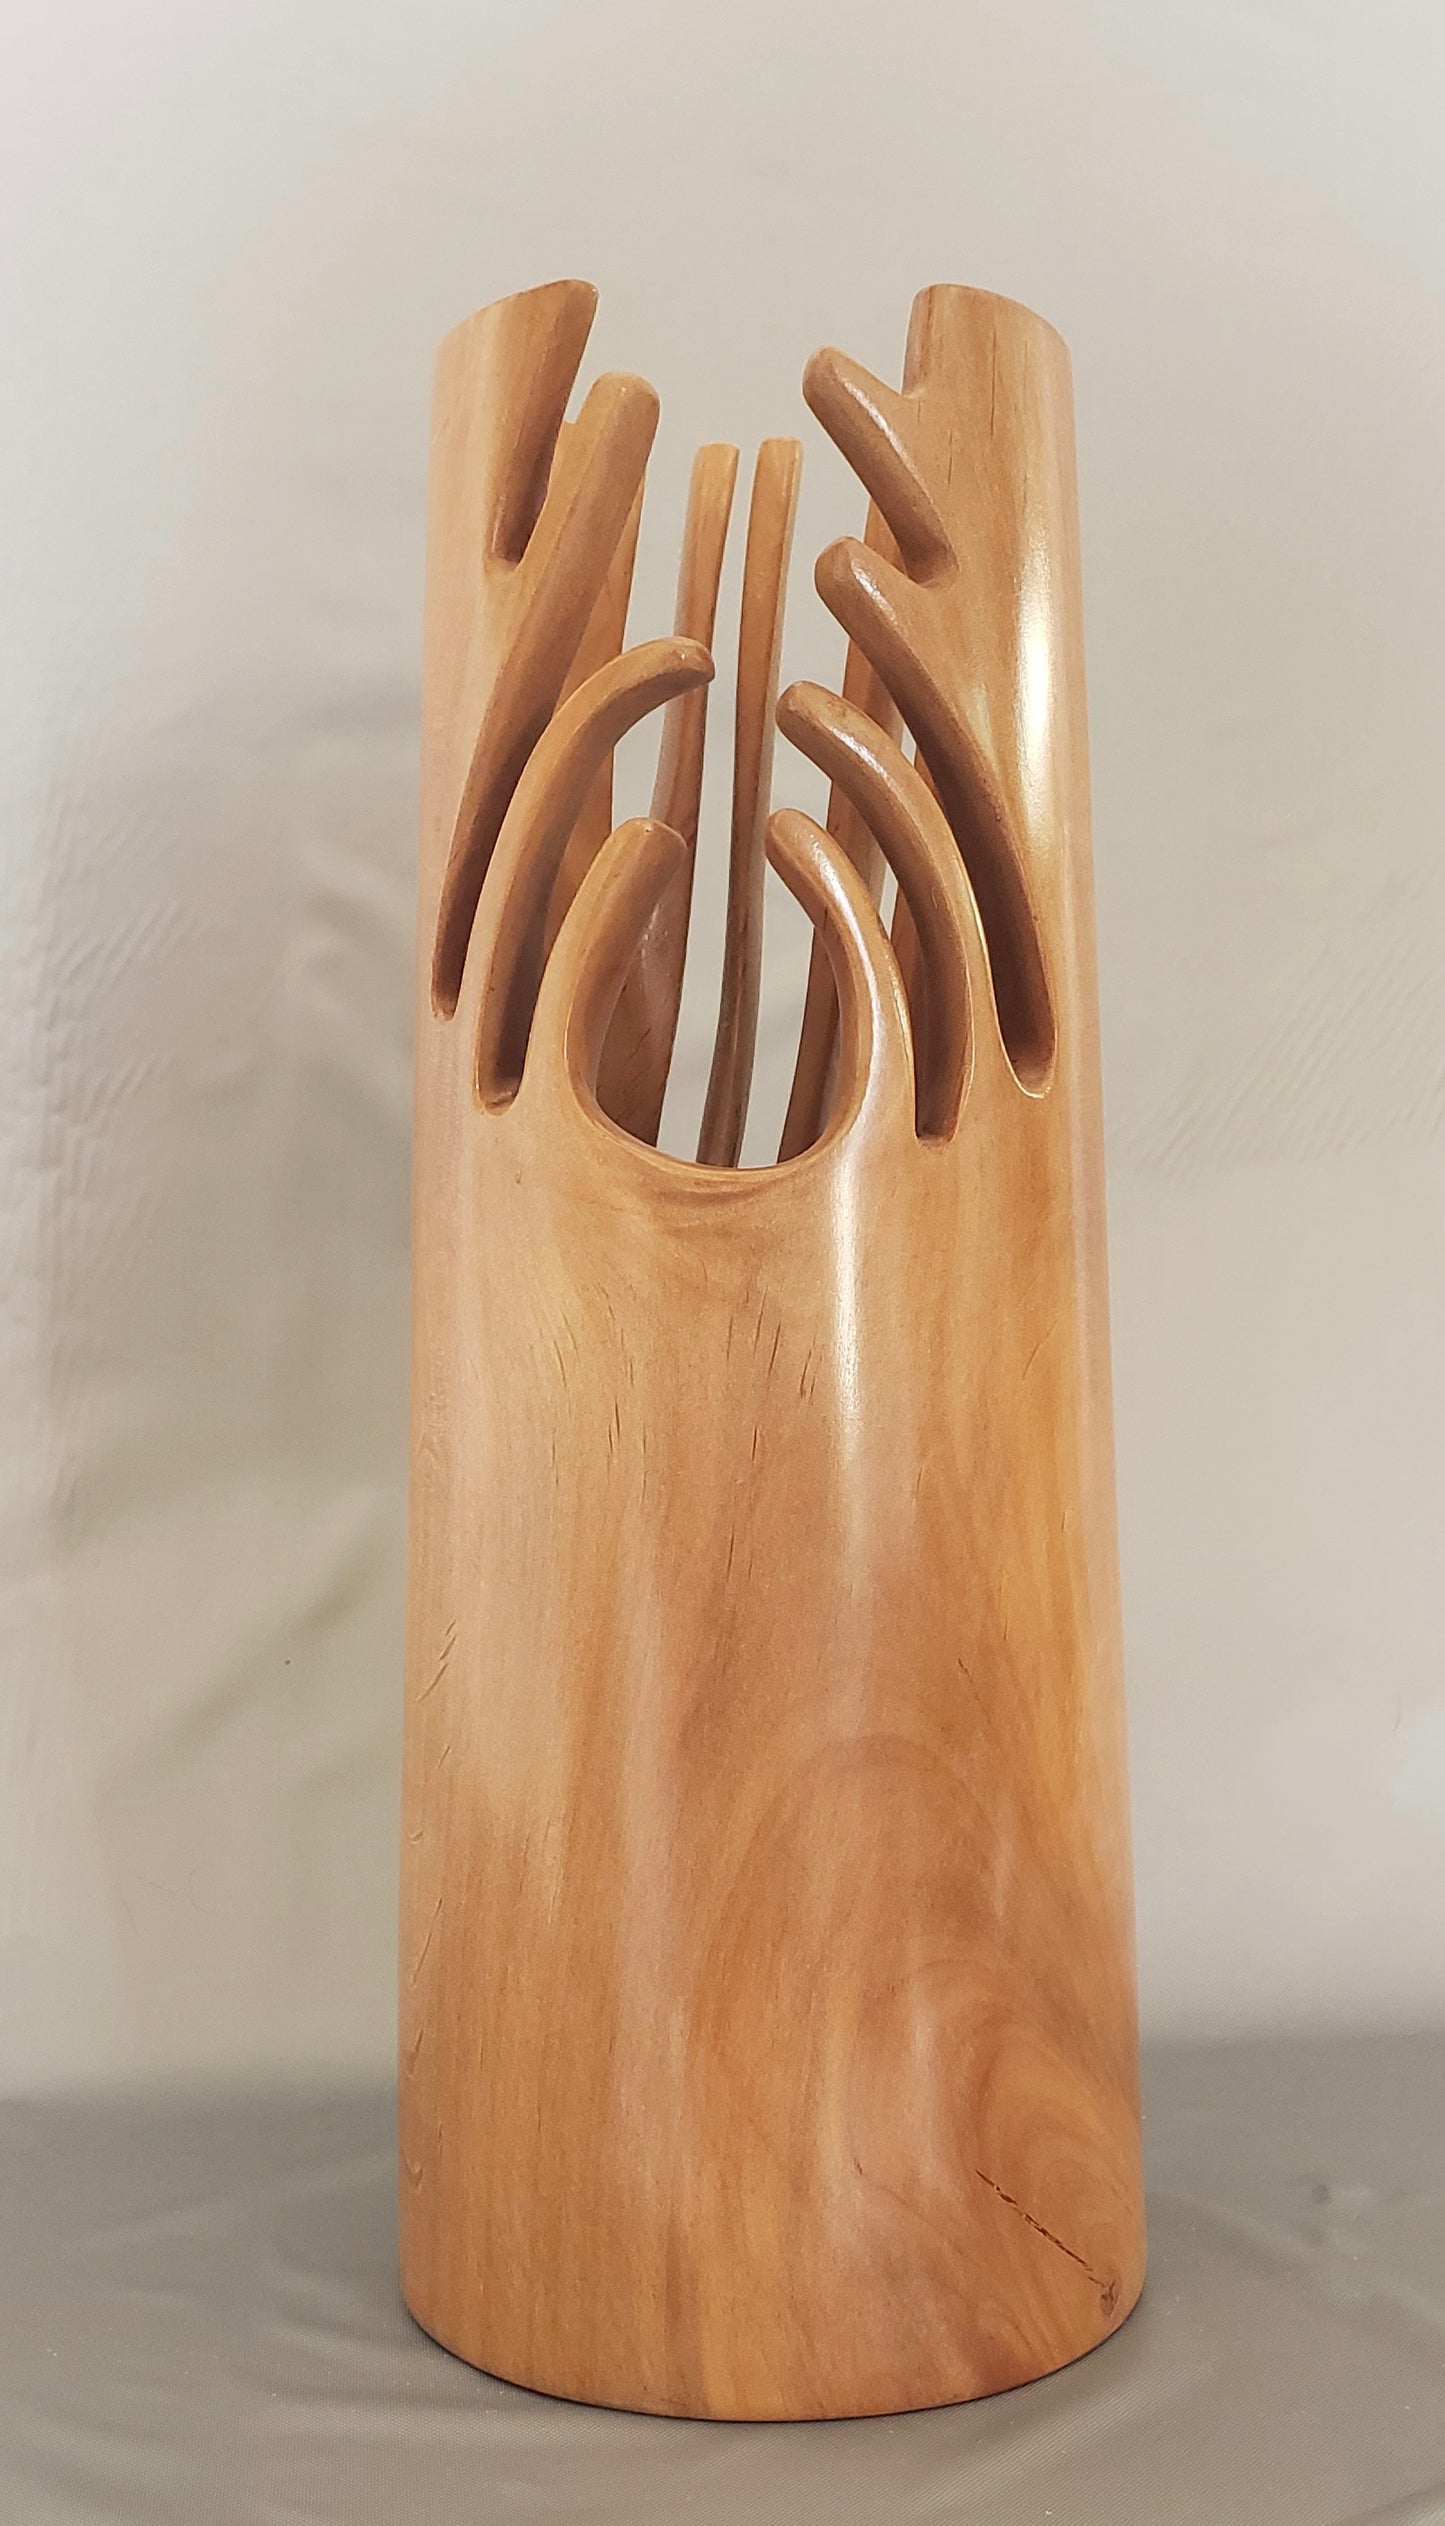 Carved Mystery Wood Vase | by David Wittenbrock